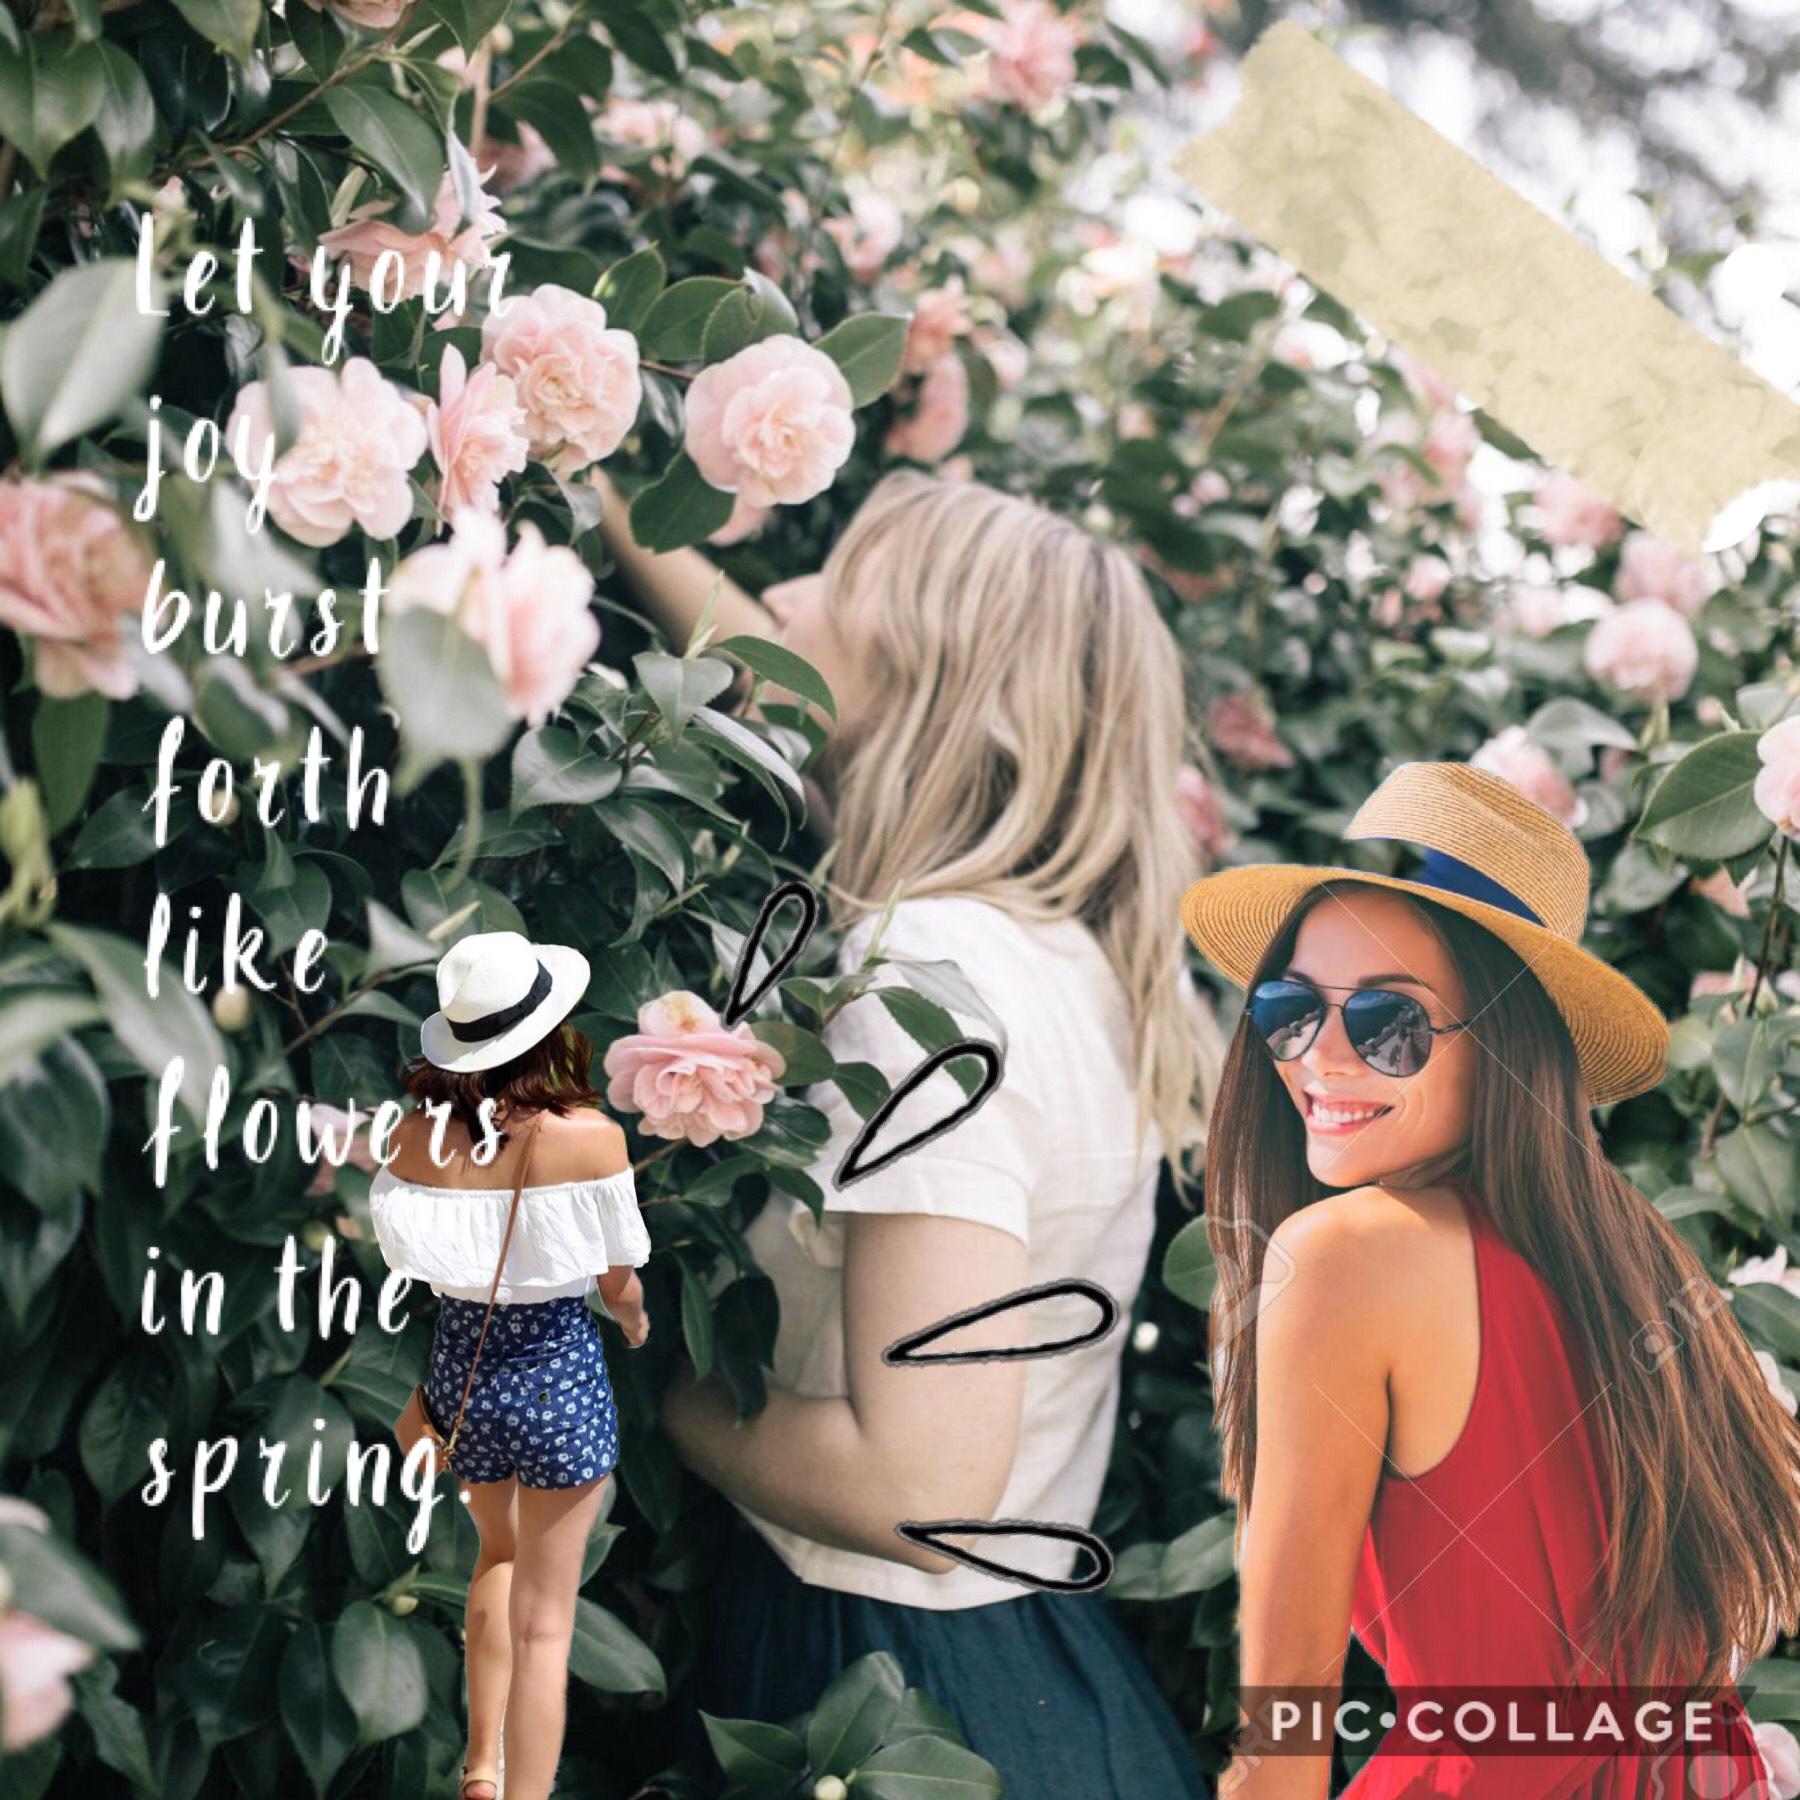 happy spring🌸!!!! 
I tried my best on one of my first collages....
Comment some ideas for my upcoming collages!